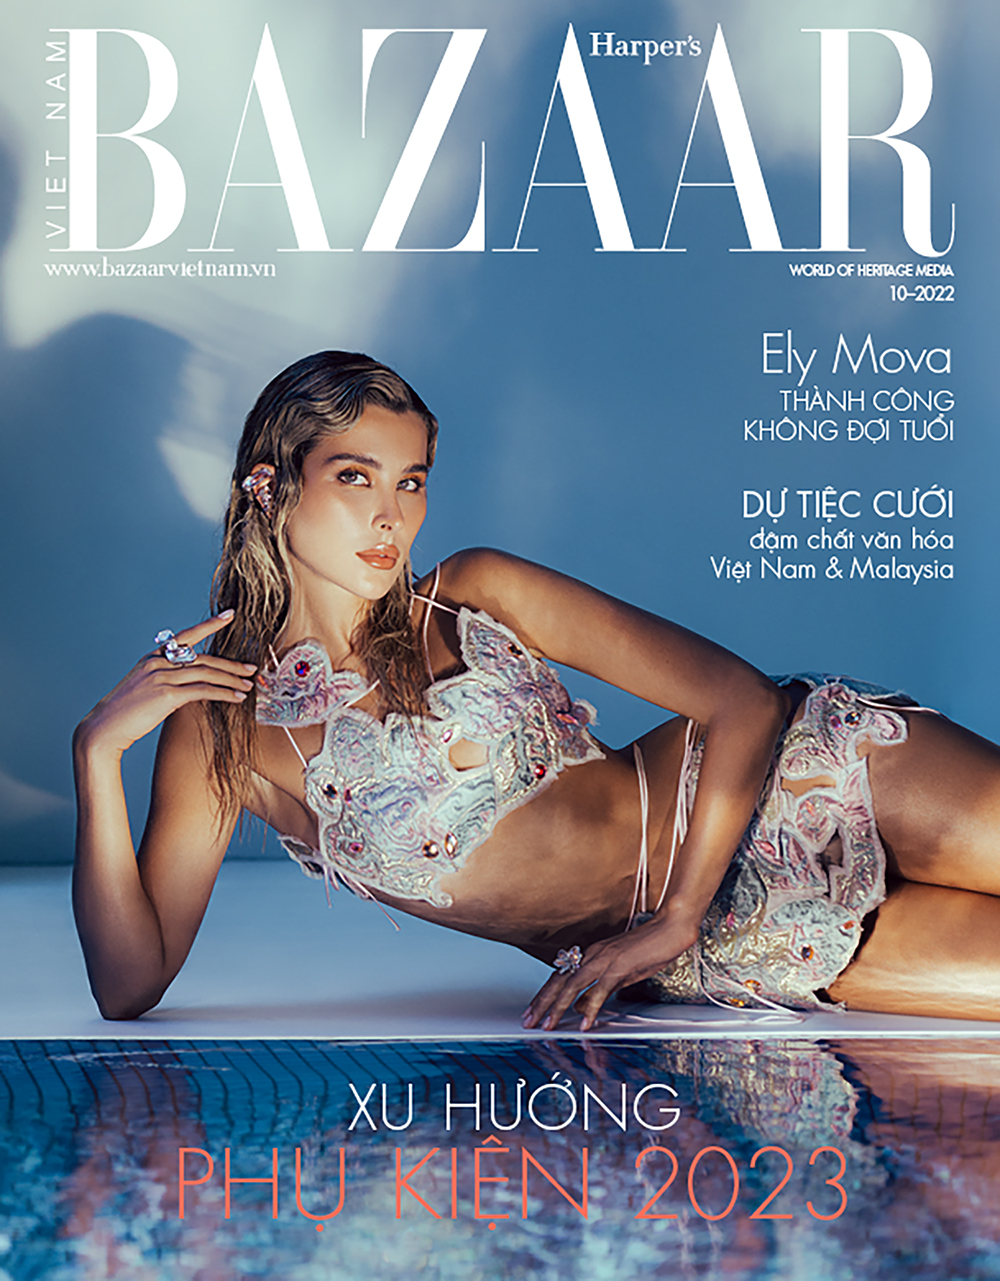 Ely Mova on the cover of Harper’s Bazaar Vietnam on 10/22.